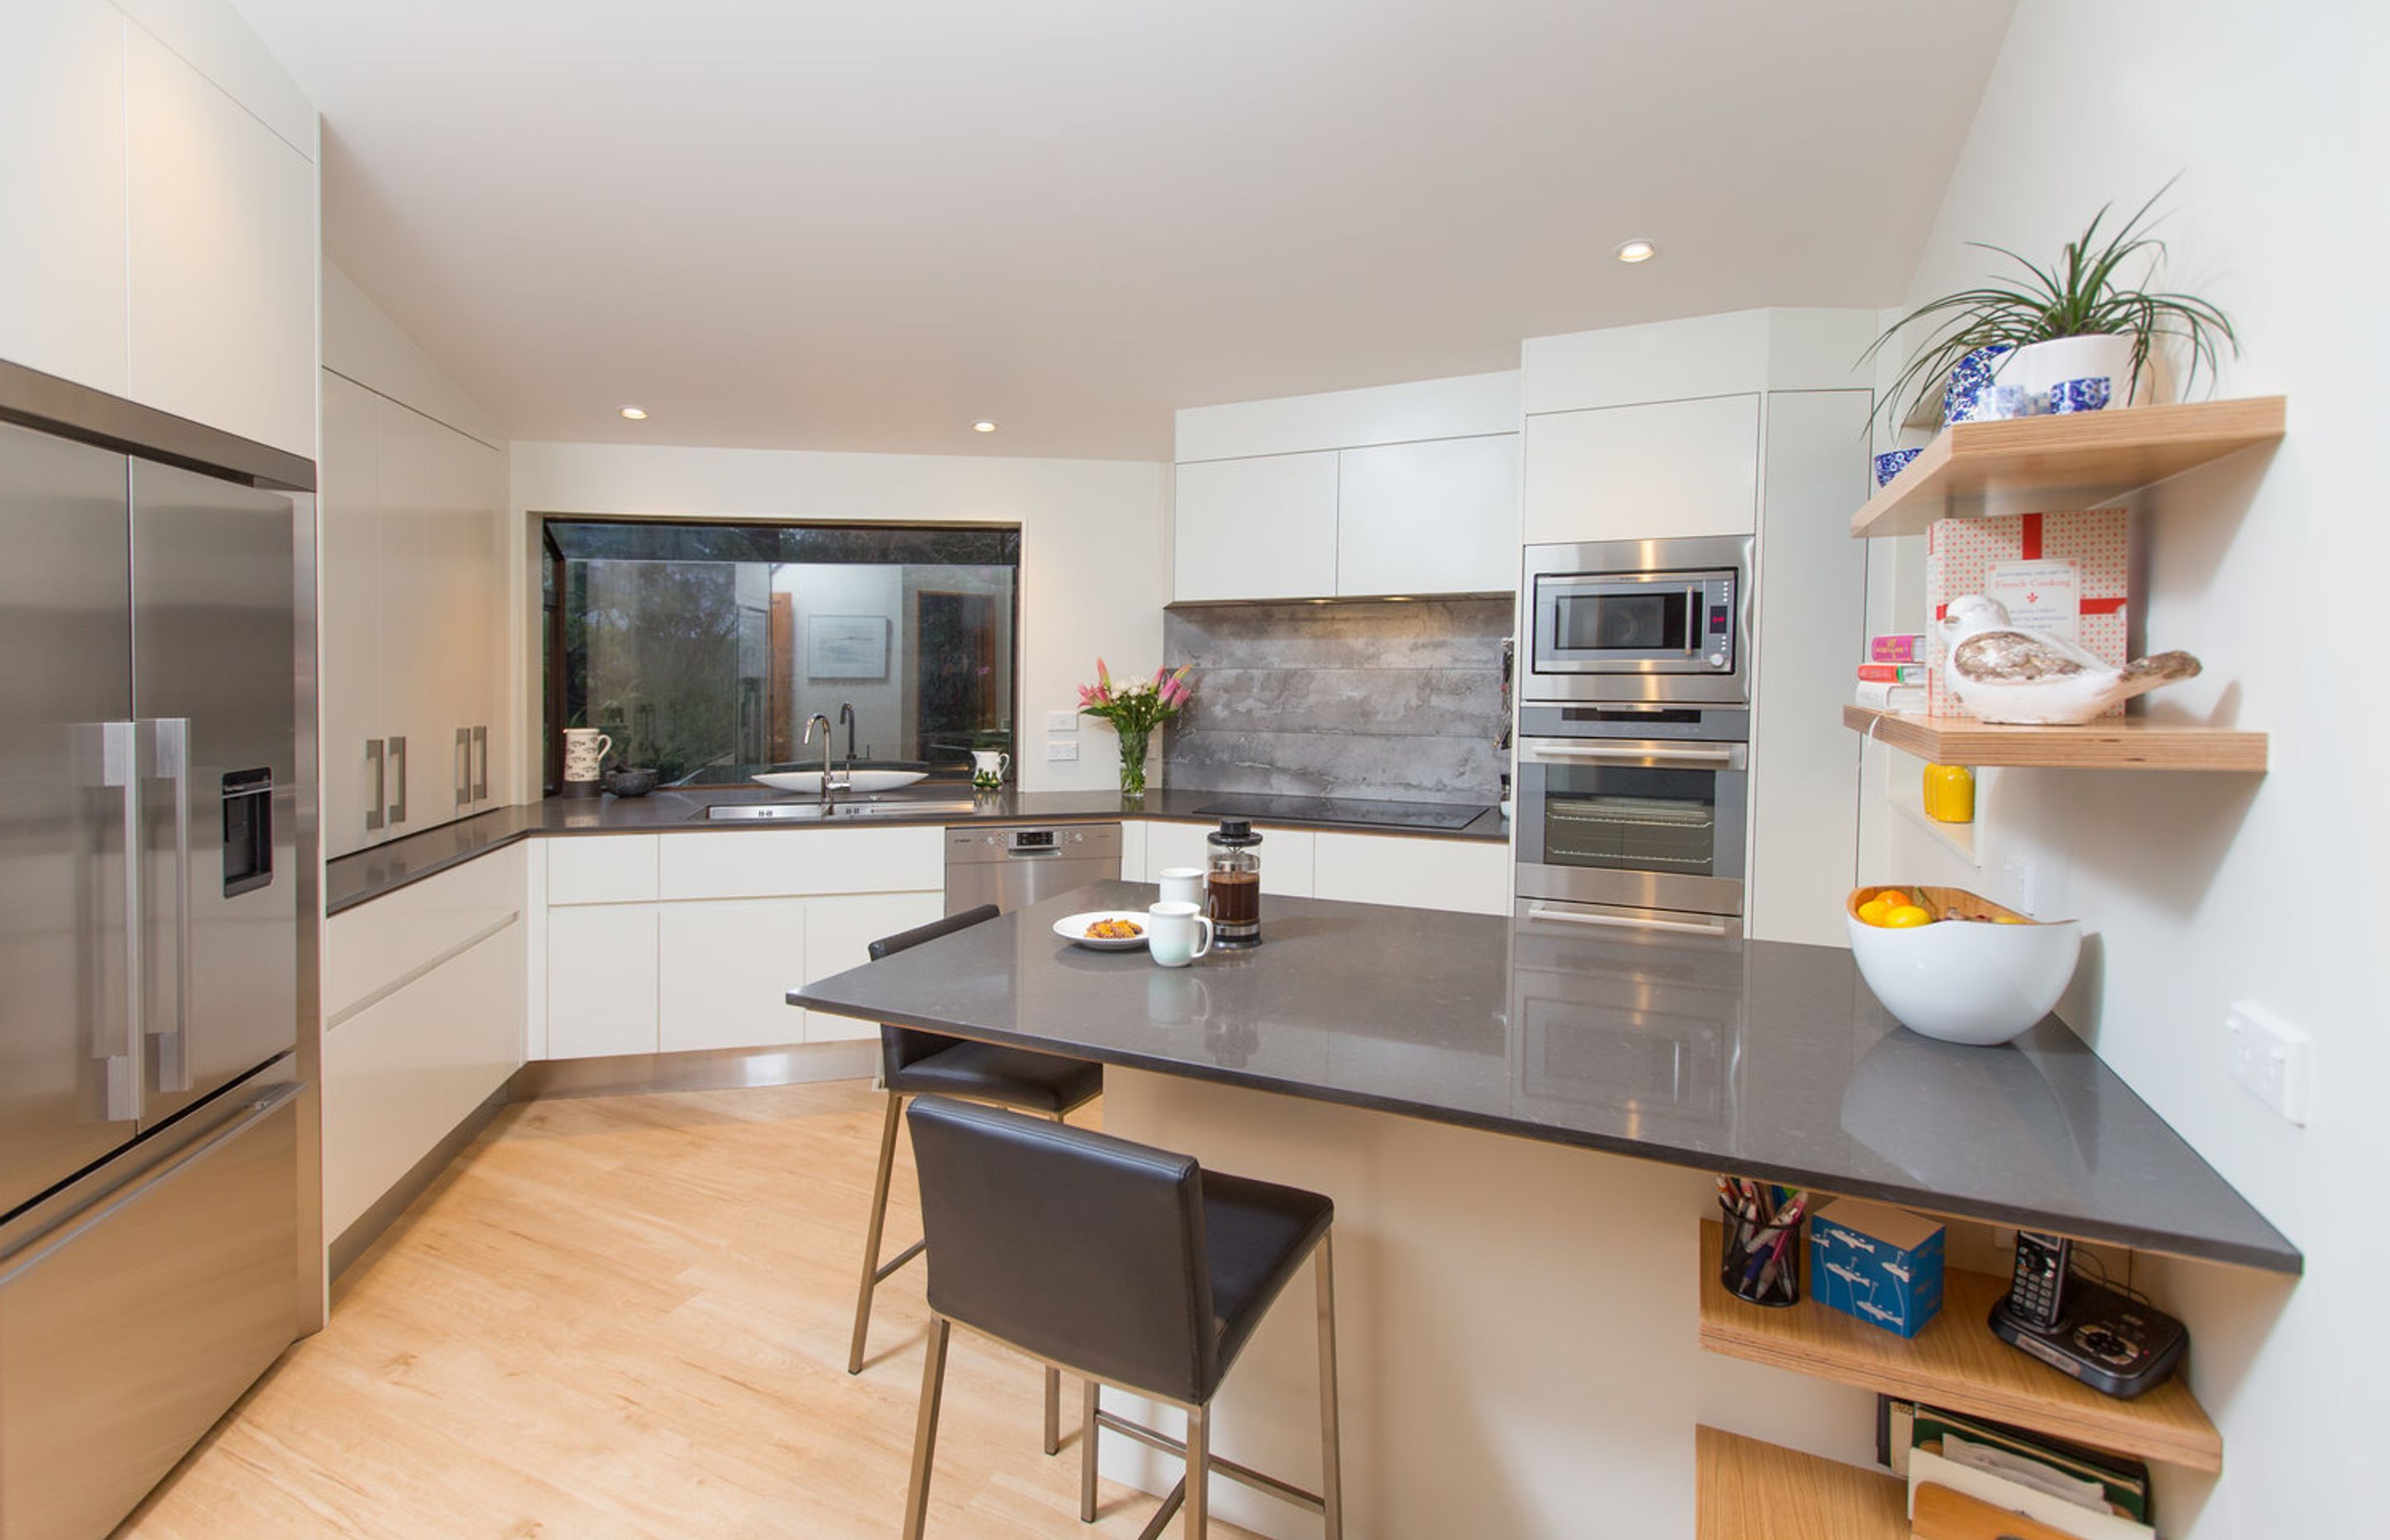 Clean and streamlined finish in this kitchen, with generous workspace and high end appliances.